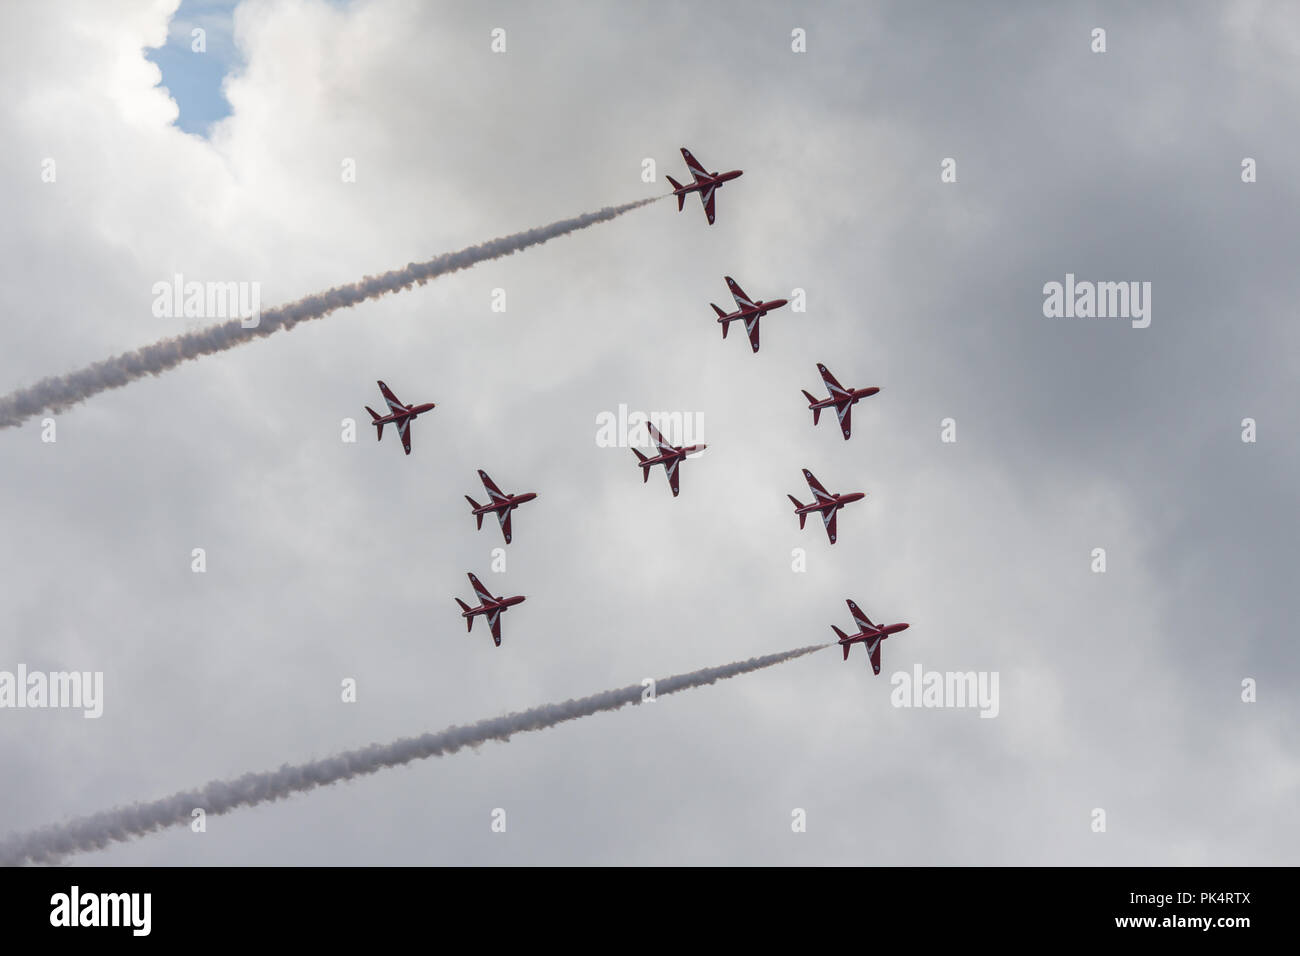 Aircraft Formation - The Red Arrows, the Royal Air Force aerobatics team, on display at airshow over Carrickfergus Castle, County Antrim, N.Ireland. Stock Photo